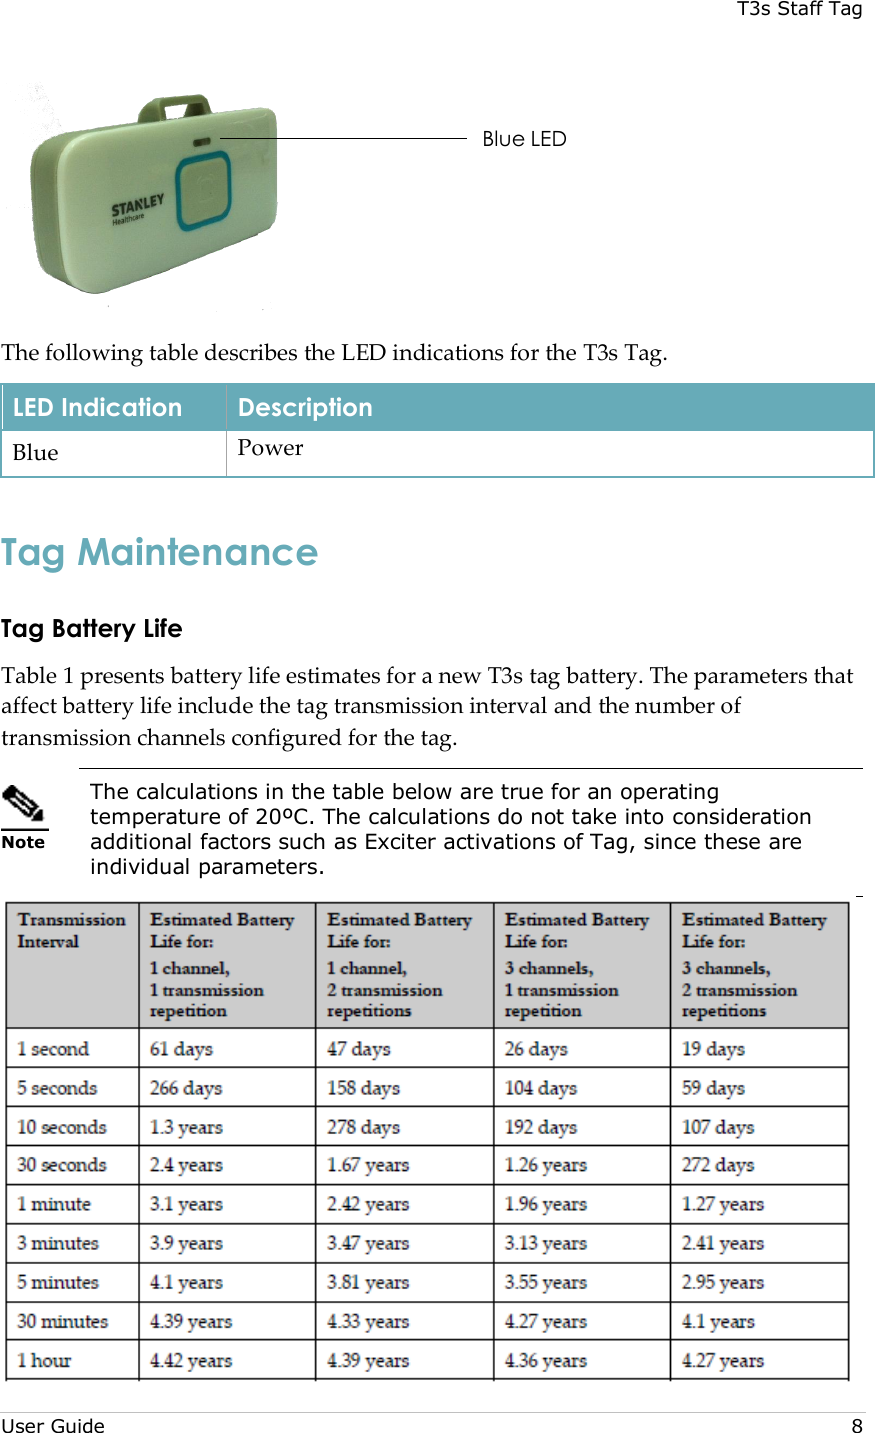 T3s Staff Tag  User Guide     8  The following table describes the LED indications for the T3s Tag. LED Indication Description Blue Power Tag Maintenance Tag Battery Life Table 1 presents battery life estimates for a new T3s tag battery. The parameters that affect battery life include the tag transmission interval and the number of transmission channels configured for the tag.  Note The calculations in the table below are true for an operating temperature of 20ºC. The calculations do not take into consideration additional factors such as Exciter activations of Tag, since these are individual parameters.  Blue LED  